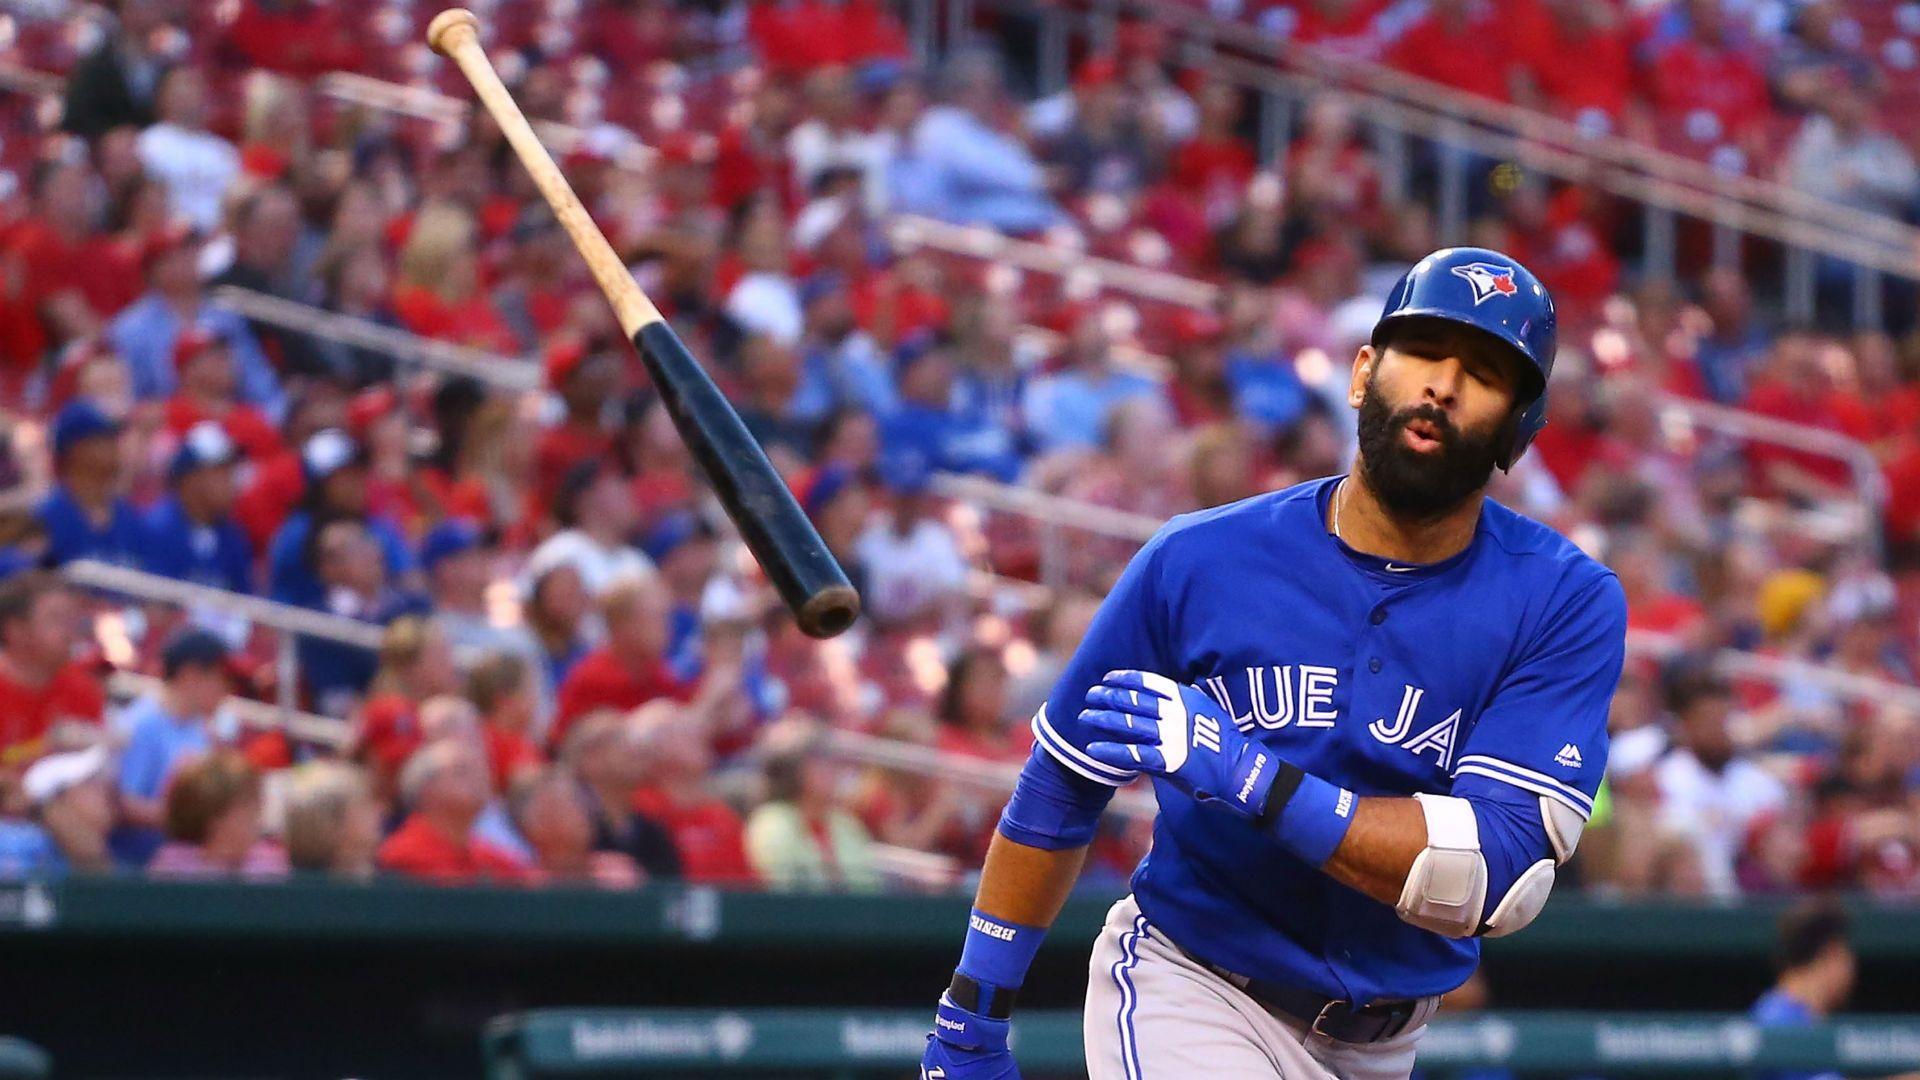 Jose Bautista's bat flip is the dumbest thing in baseball this